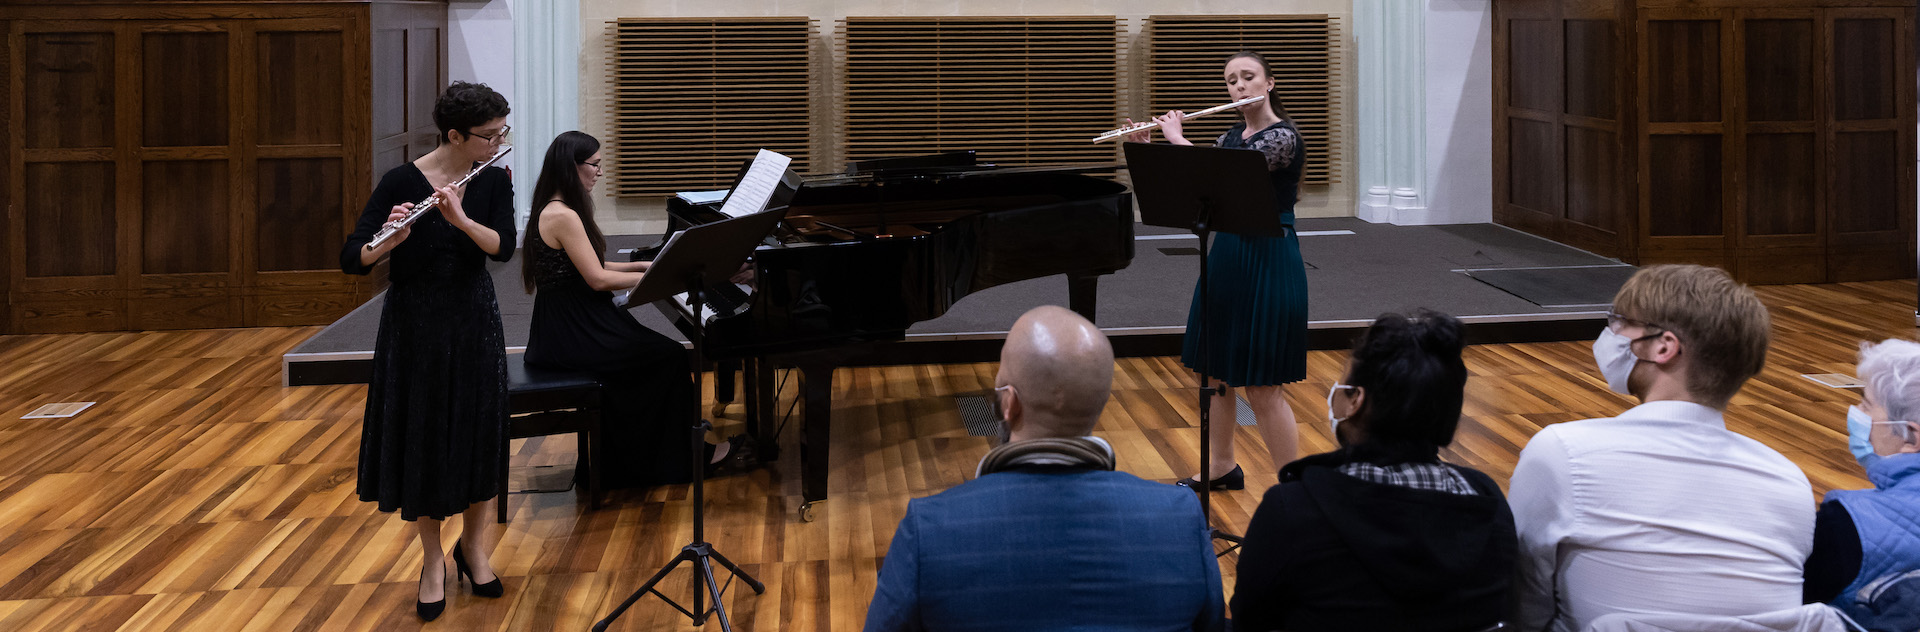 An MPO Academy event showcasing flute music by Bach